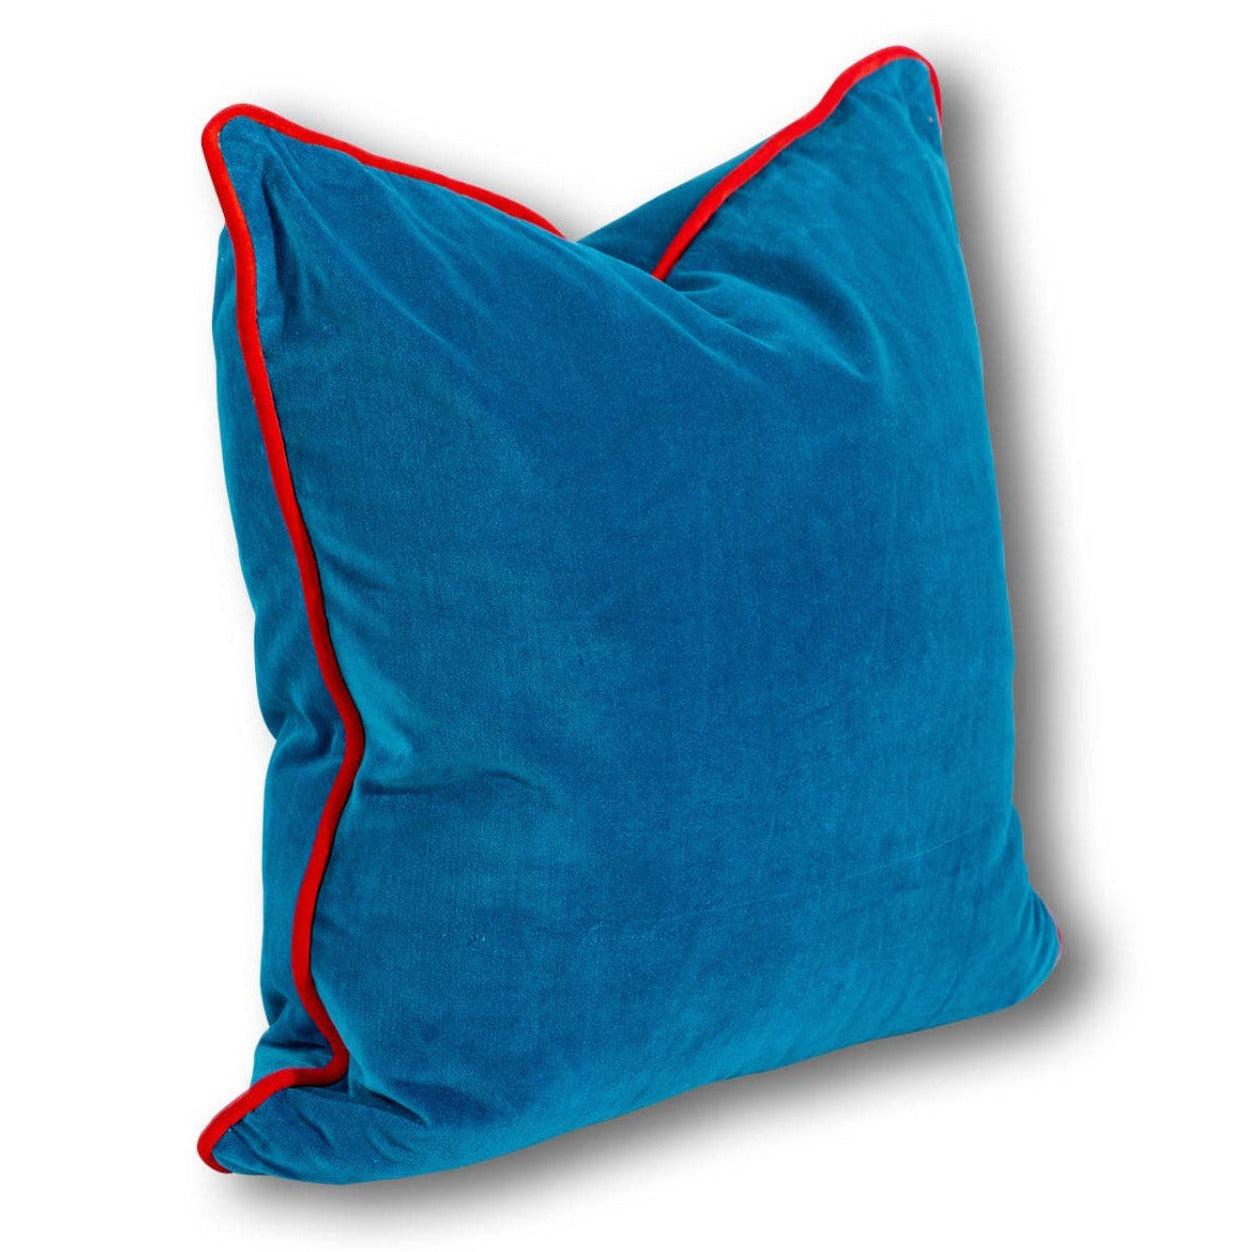 A Peacock blue velvet square pillow with bright red trim.